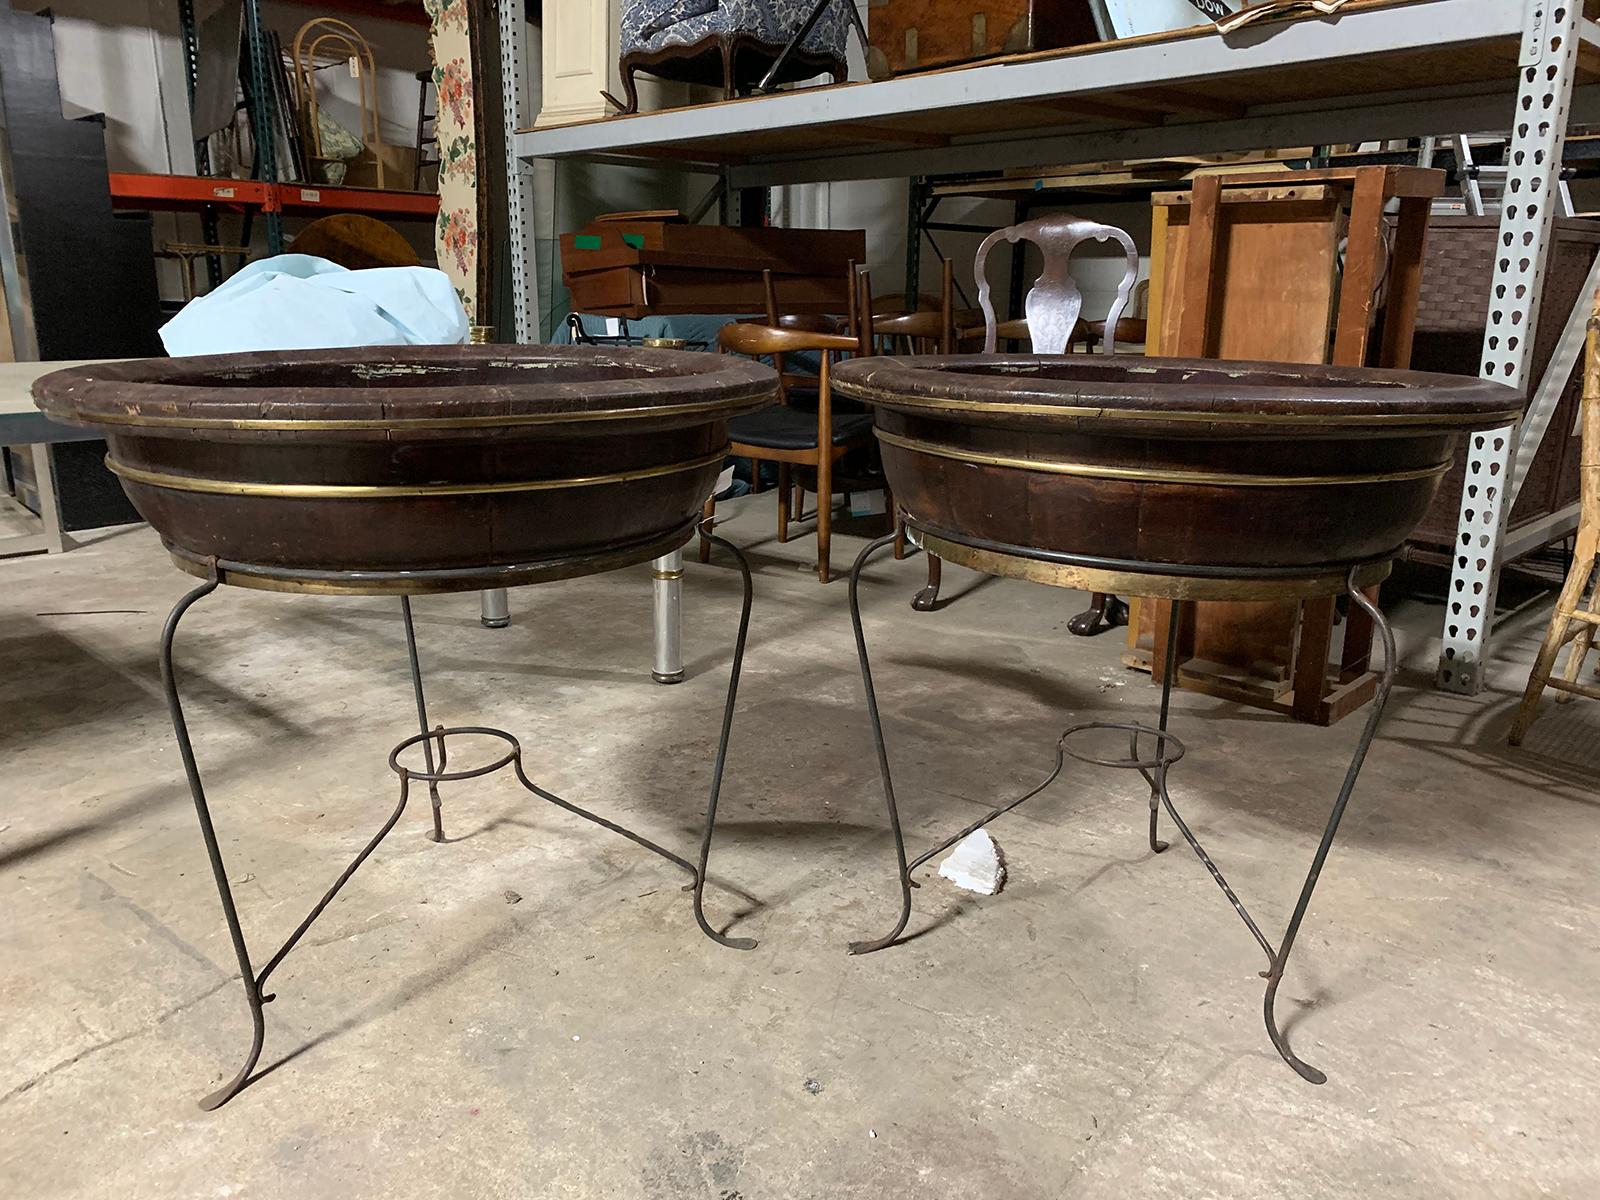 Large scale pair of 20th century Asian round wooden planters on custom metal stands
Measures: 31.5